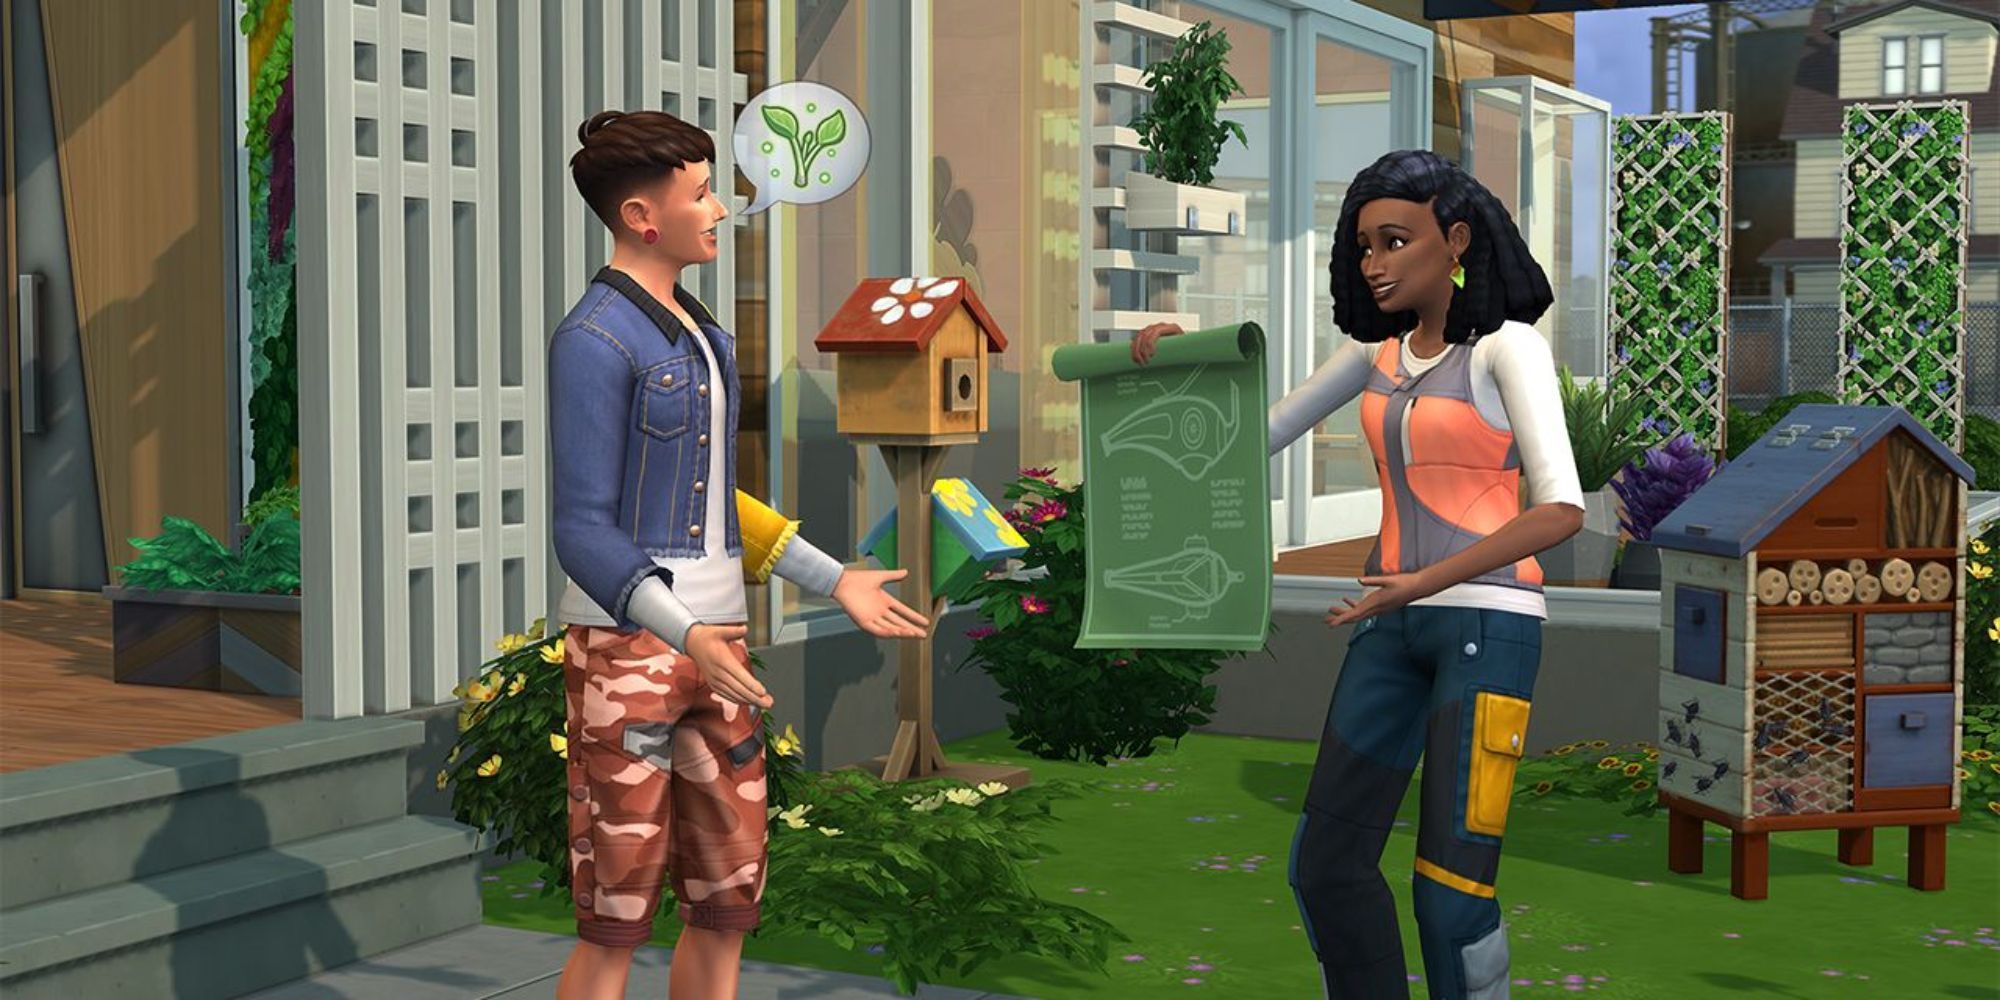 Two Sims discuss plans for eco living in The Sims 4: Eco Lifestyle